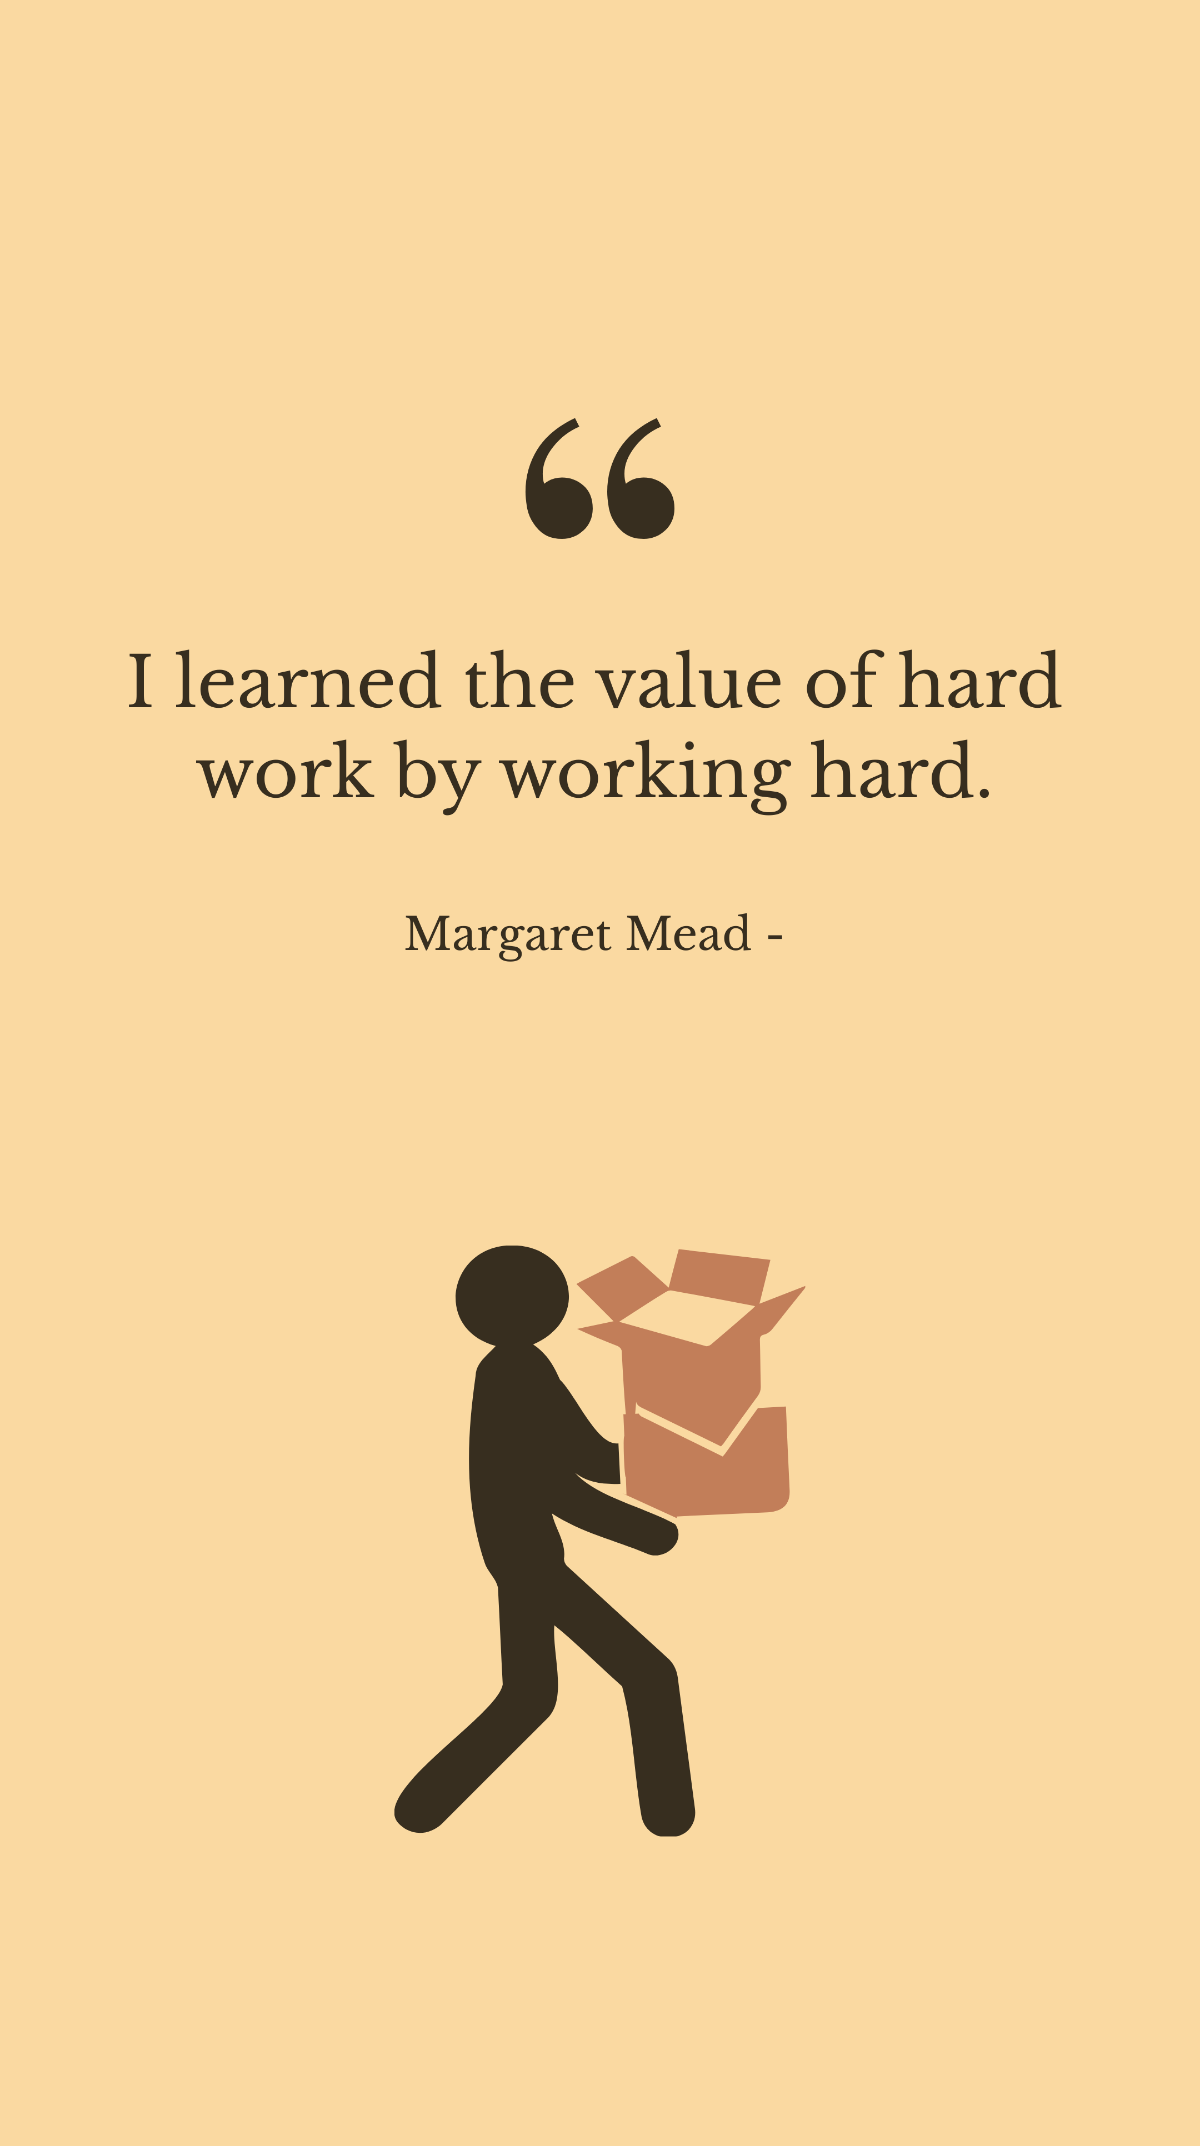 Free Margaret Mead - I learned the value of hard work by working hard. Template